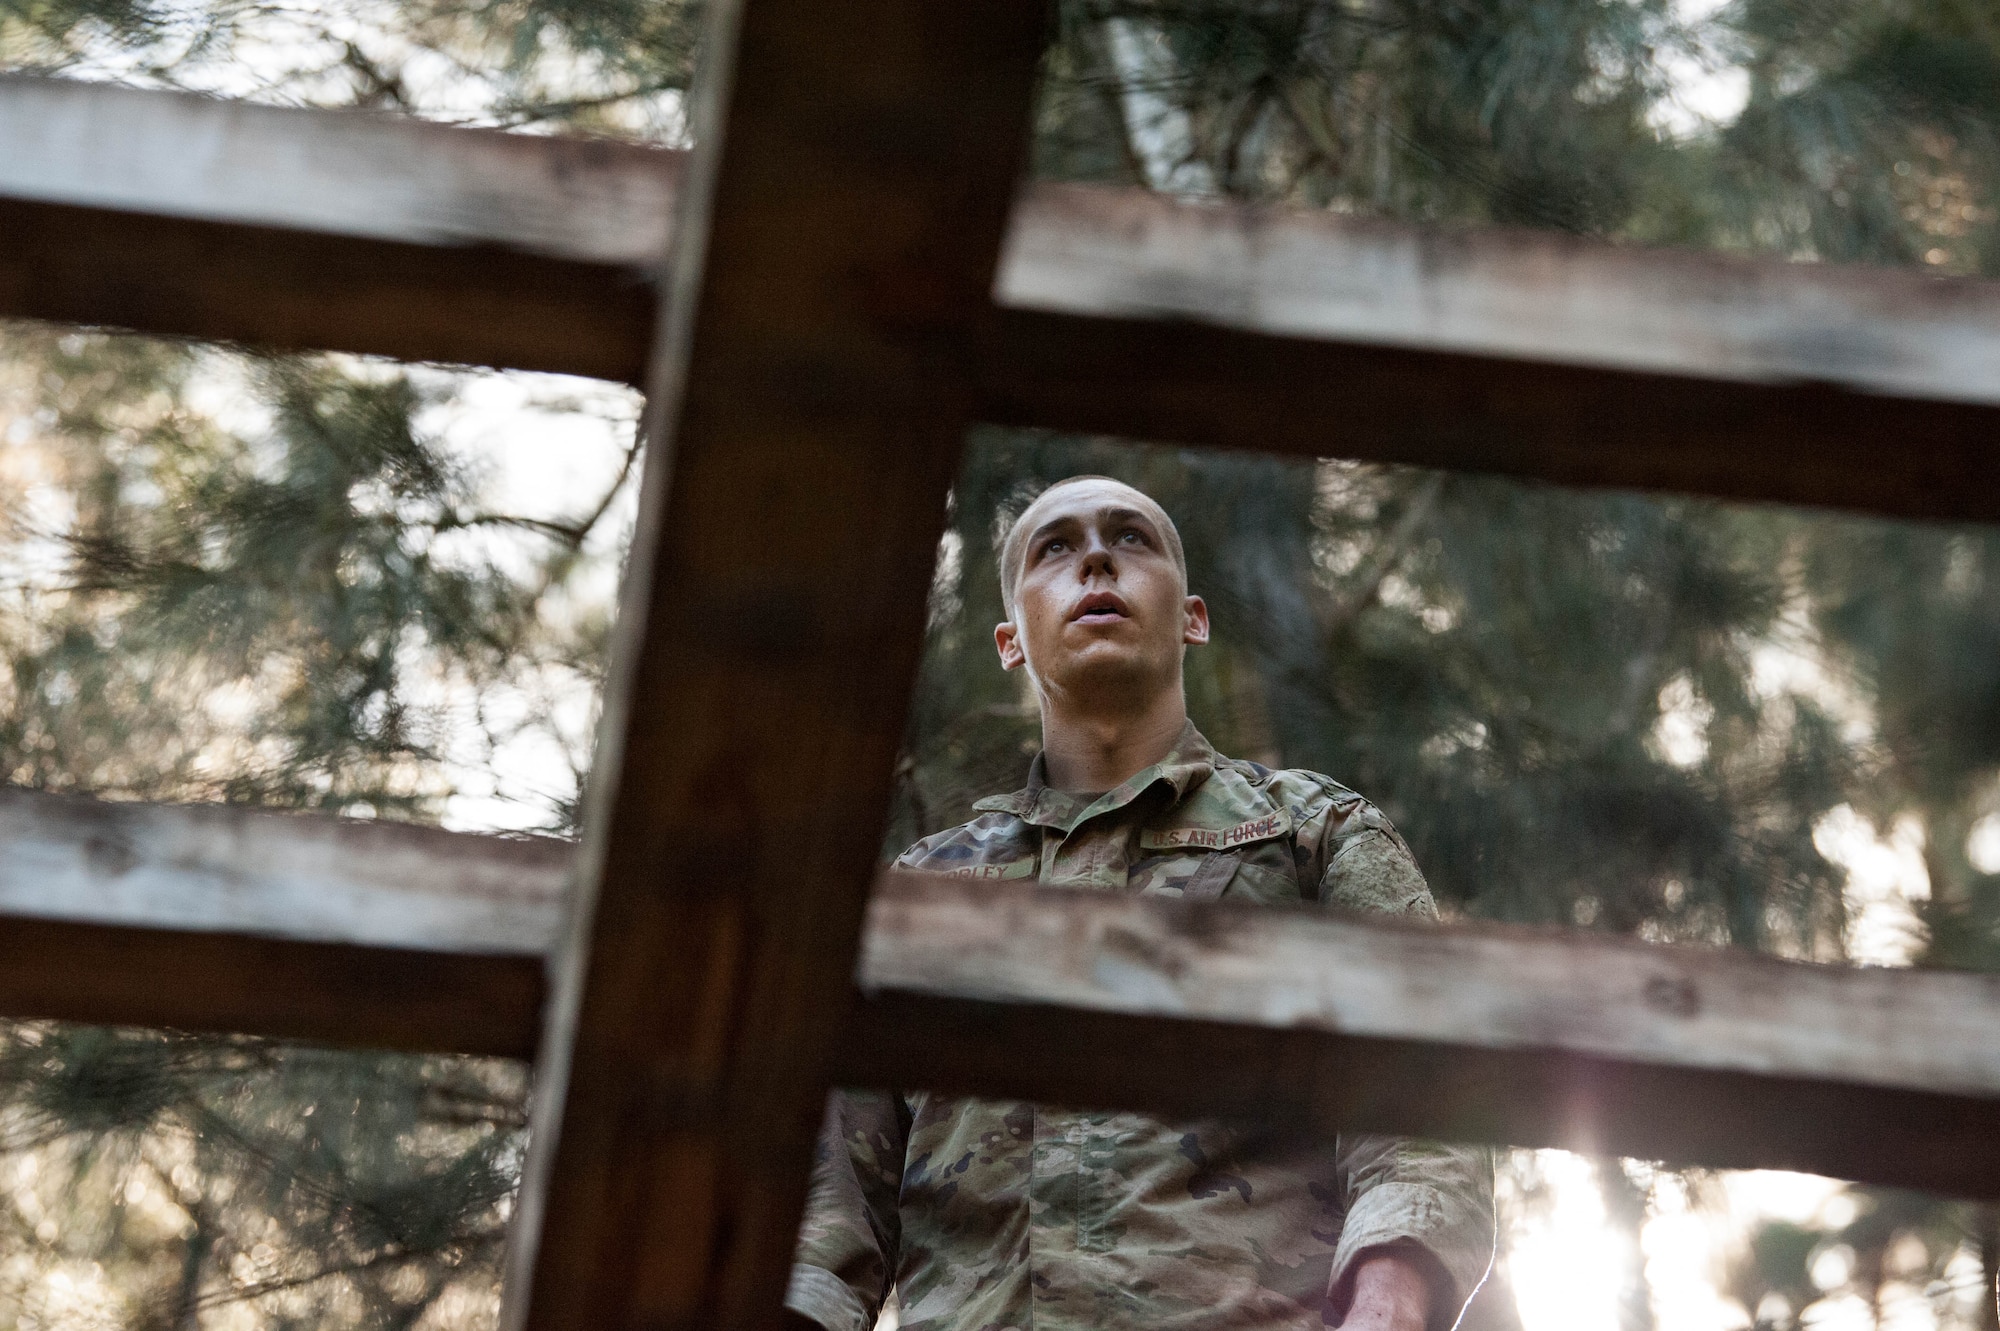 Tech. Sgt. Alexander Morley, Ranger Assessment Course student, prepares to make his was across an obstacle course during that portion of the RAC near Schofield Barracks, Oahu, Hawaii, May 20, 2019. Twenty-three Airmen from across the Air Force recently converged on a training camp for a three-week Ranger Assessment Course near Schofield Barracks, May 12-31, 2019. The purpose of the 19-day course is to prepare, assess and evaluate Air Force candidates for Army Ranger School. (U.S. Air Force photo by Staff Sgt. Hailey Haux)